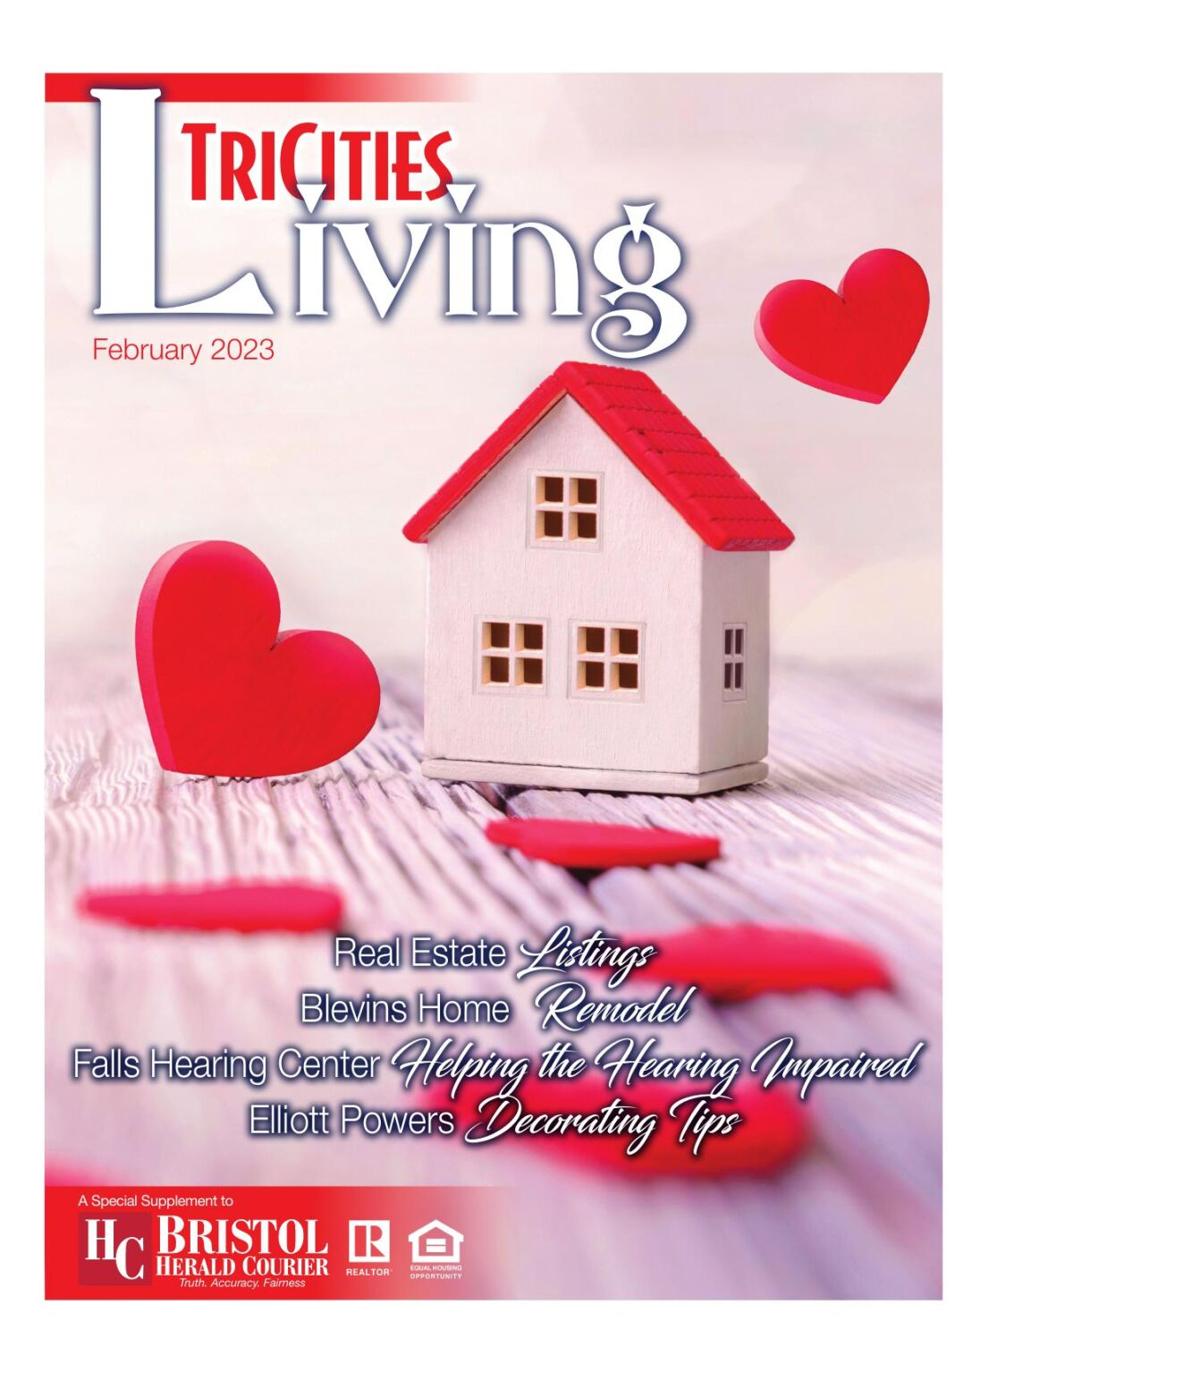 February 2023 Tricities Living